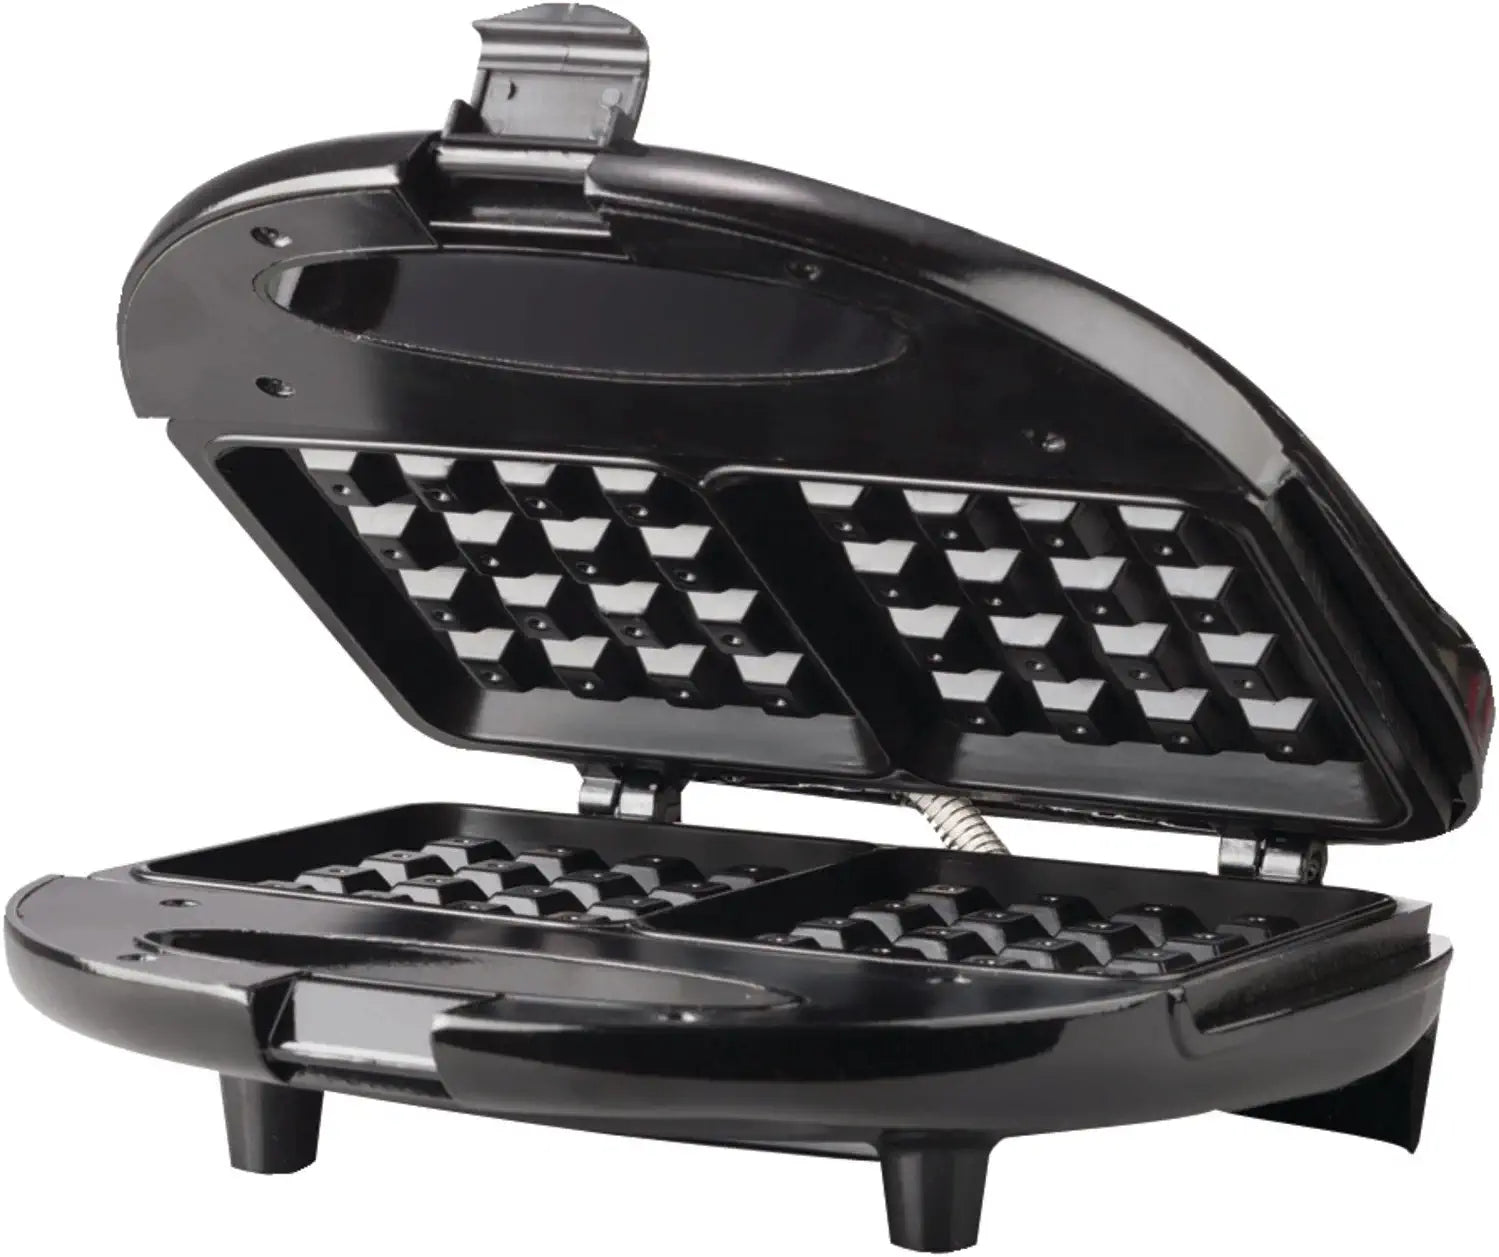 Brentwood TS-243 Non-Stick Dual Waffle Maker, Black